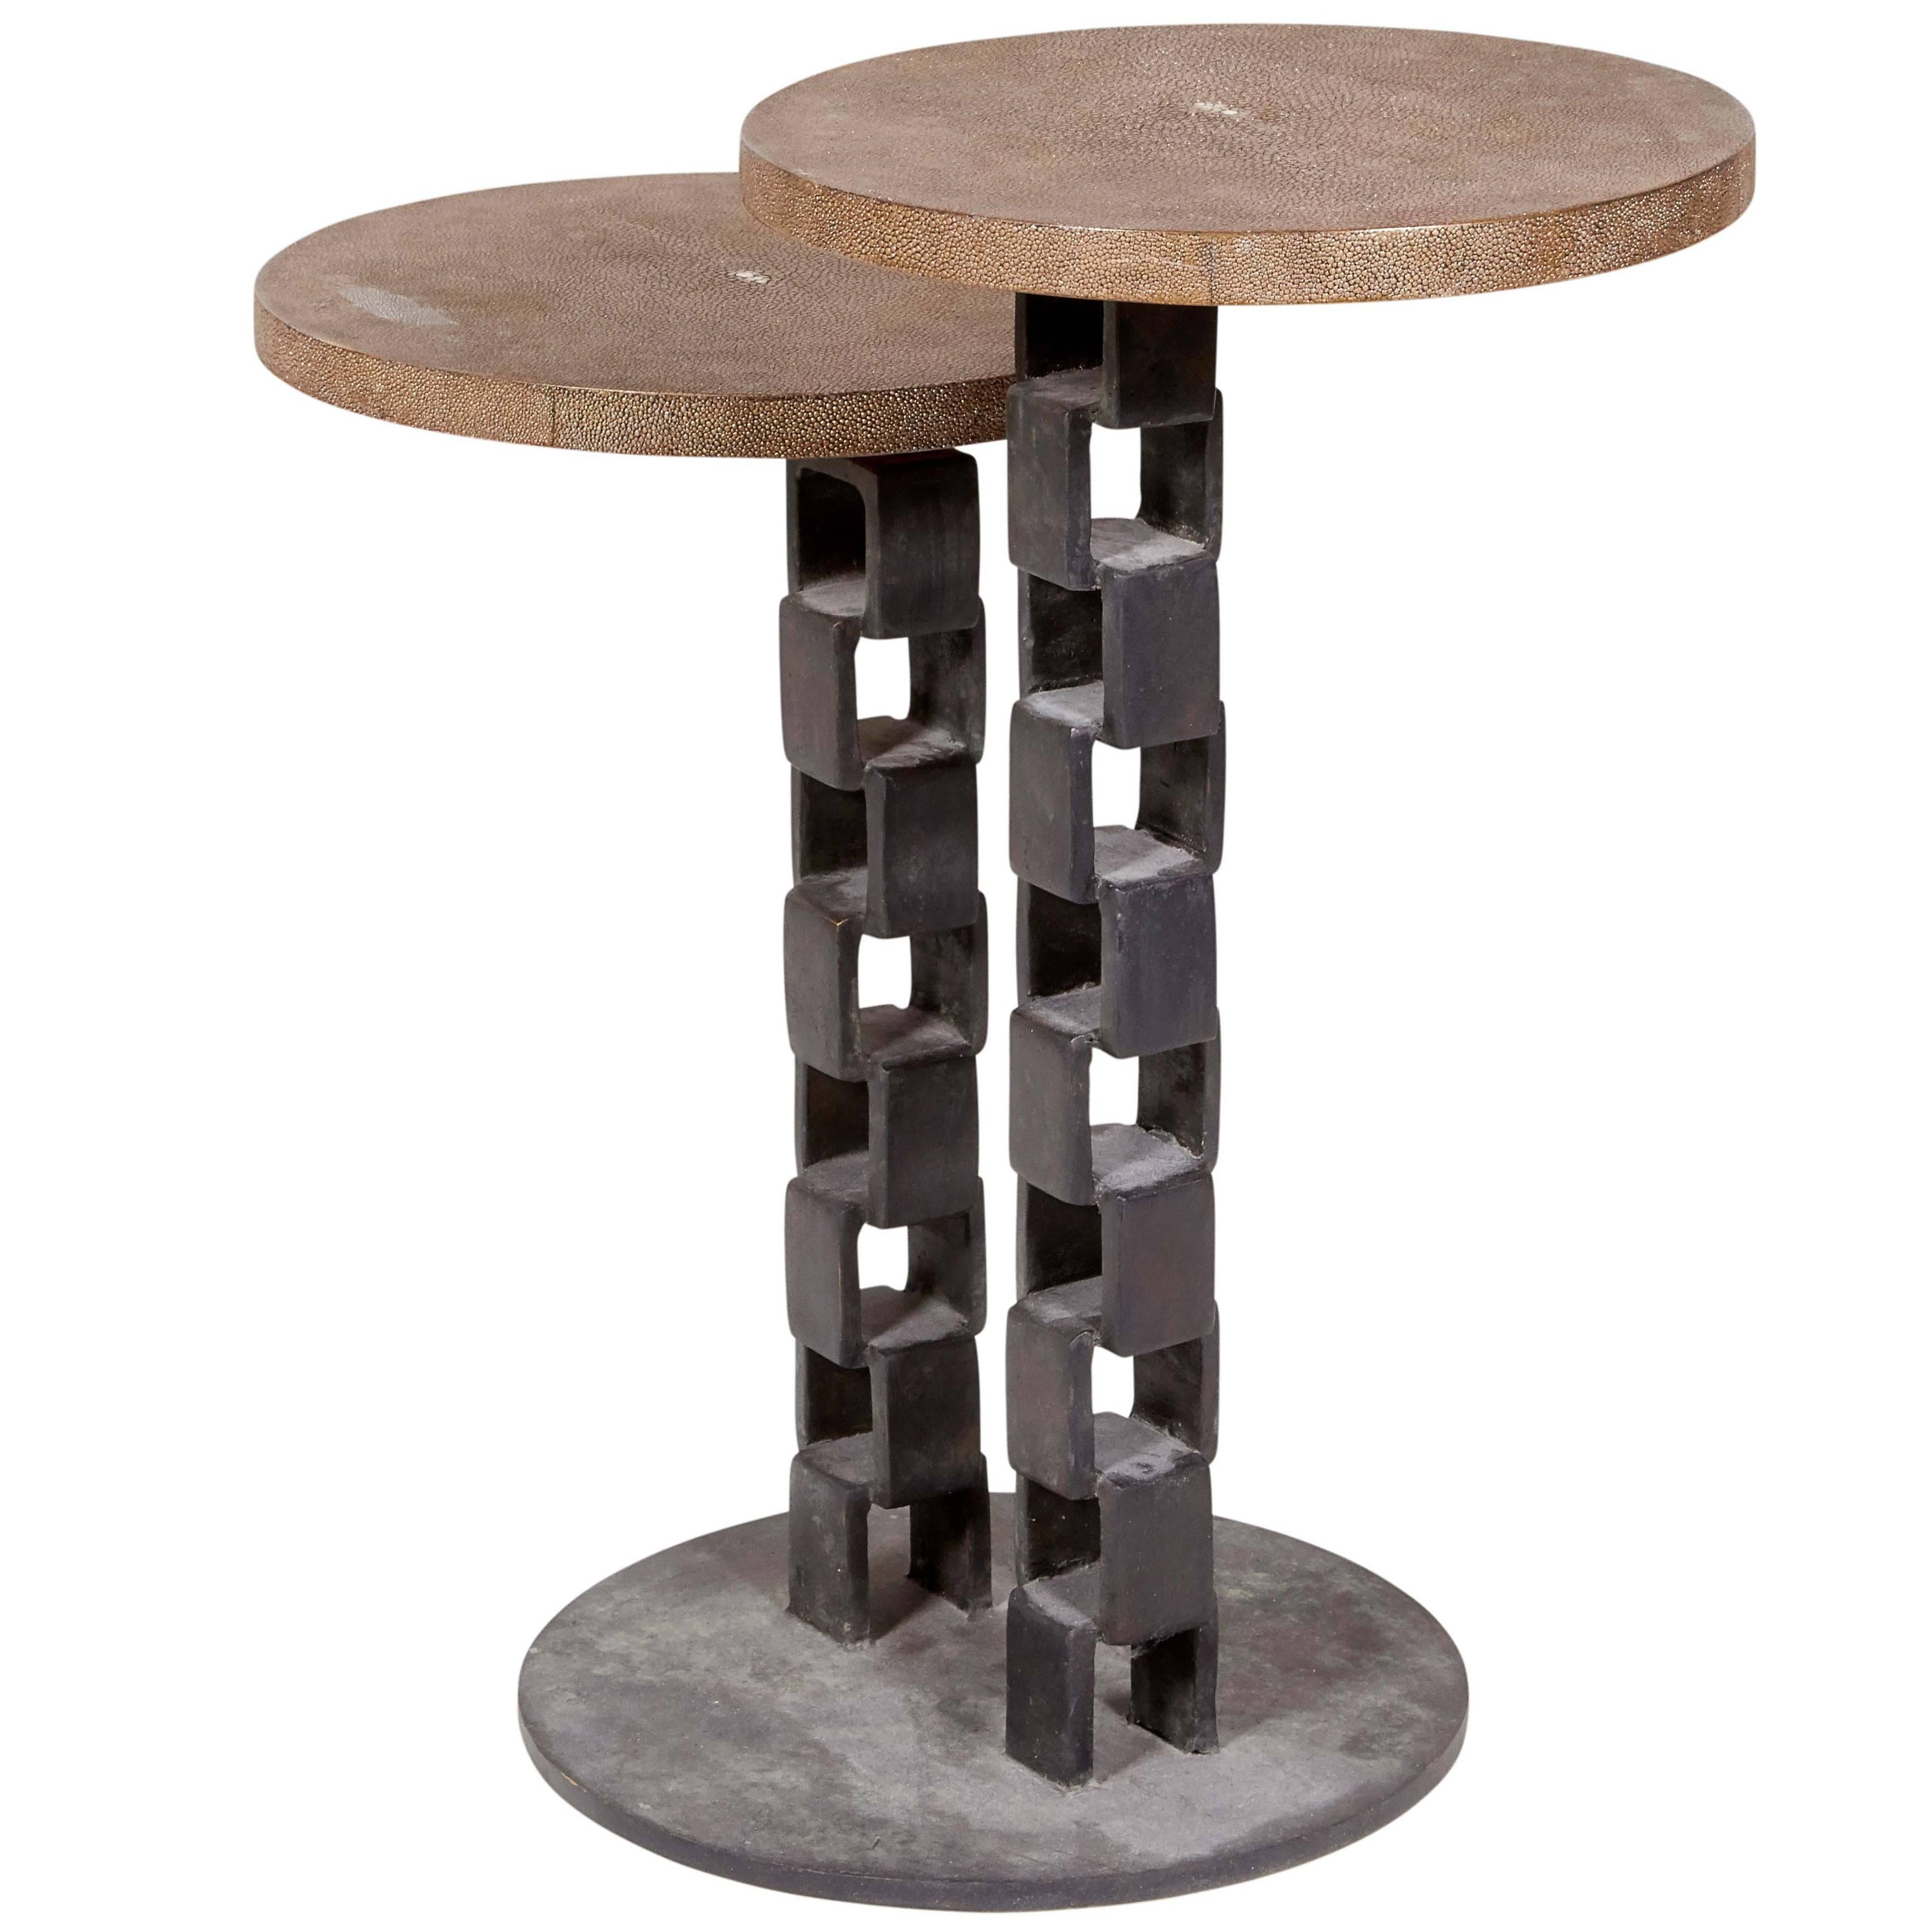 Two-Tier Shagreen Top Table on Chain Link Base